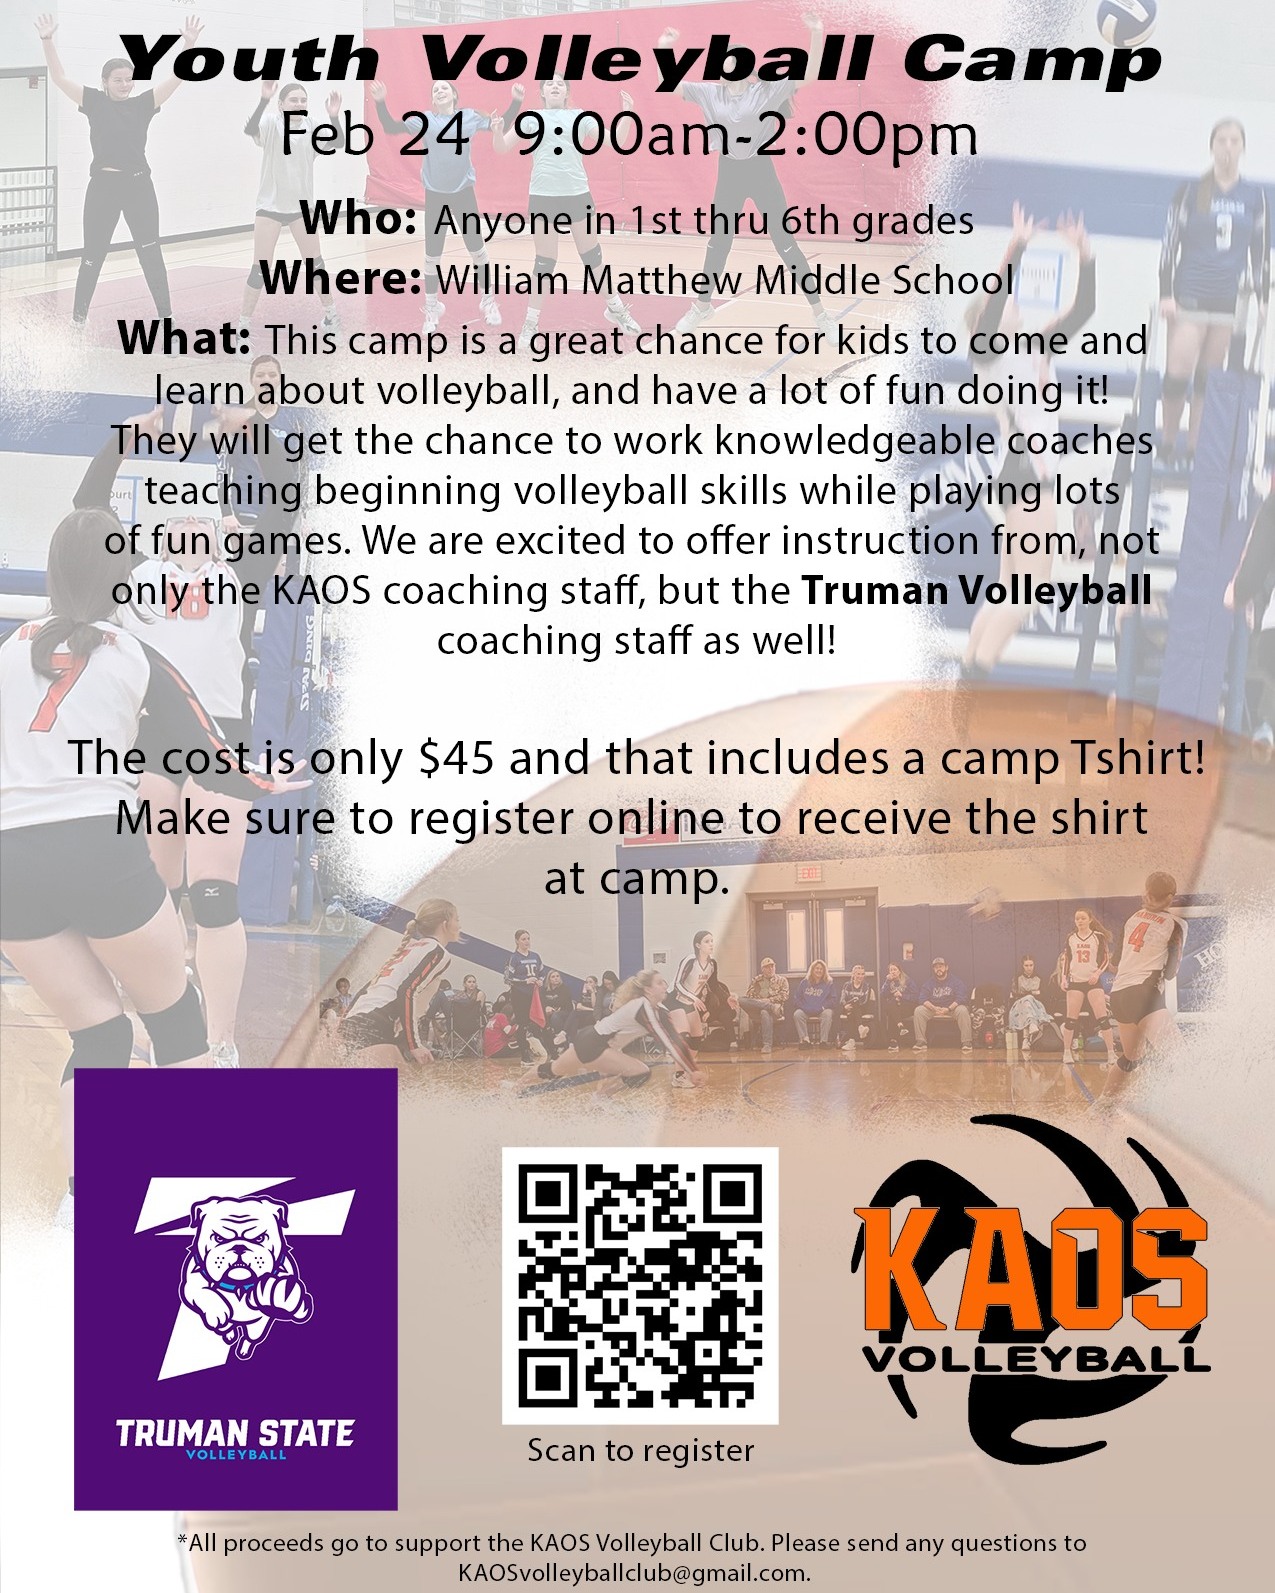 Check more about KAOS Volleyball Youth Camp